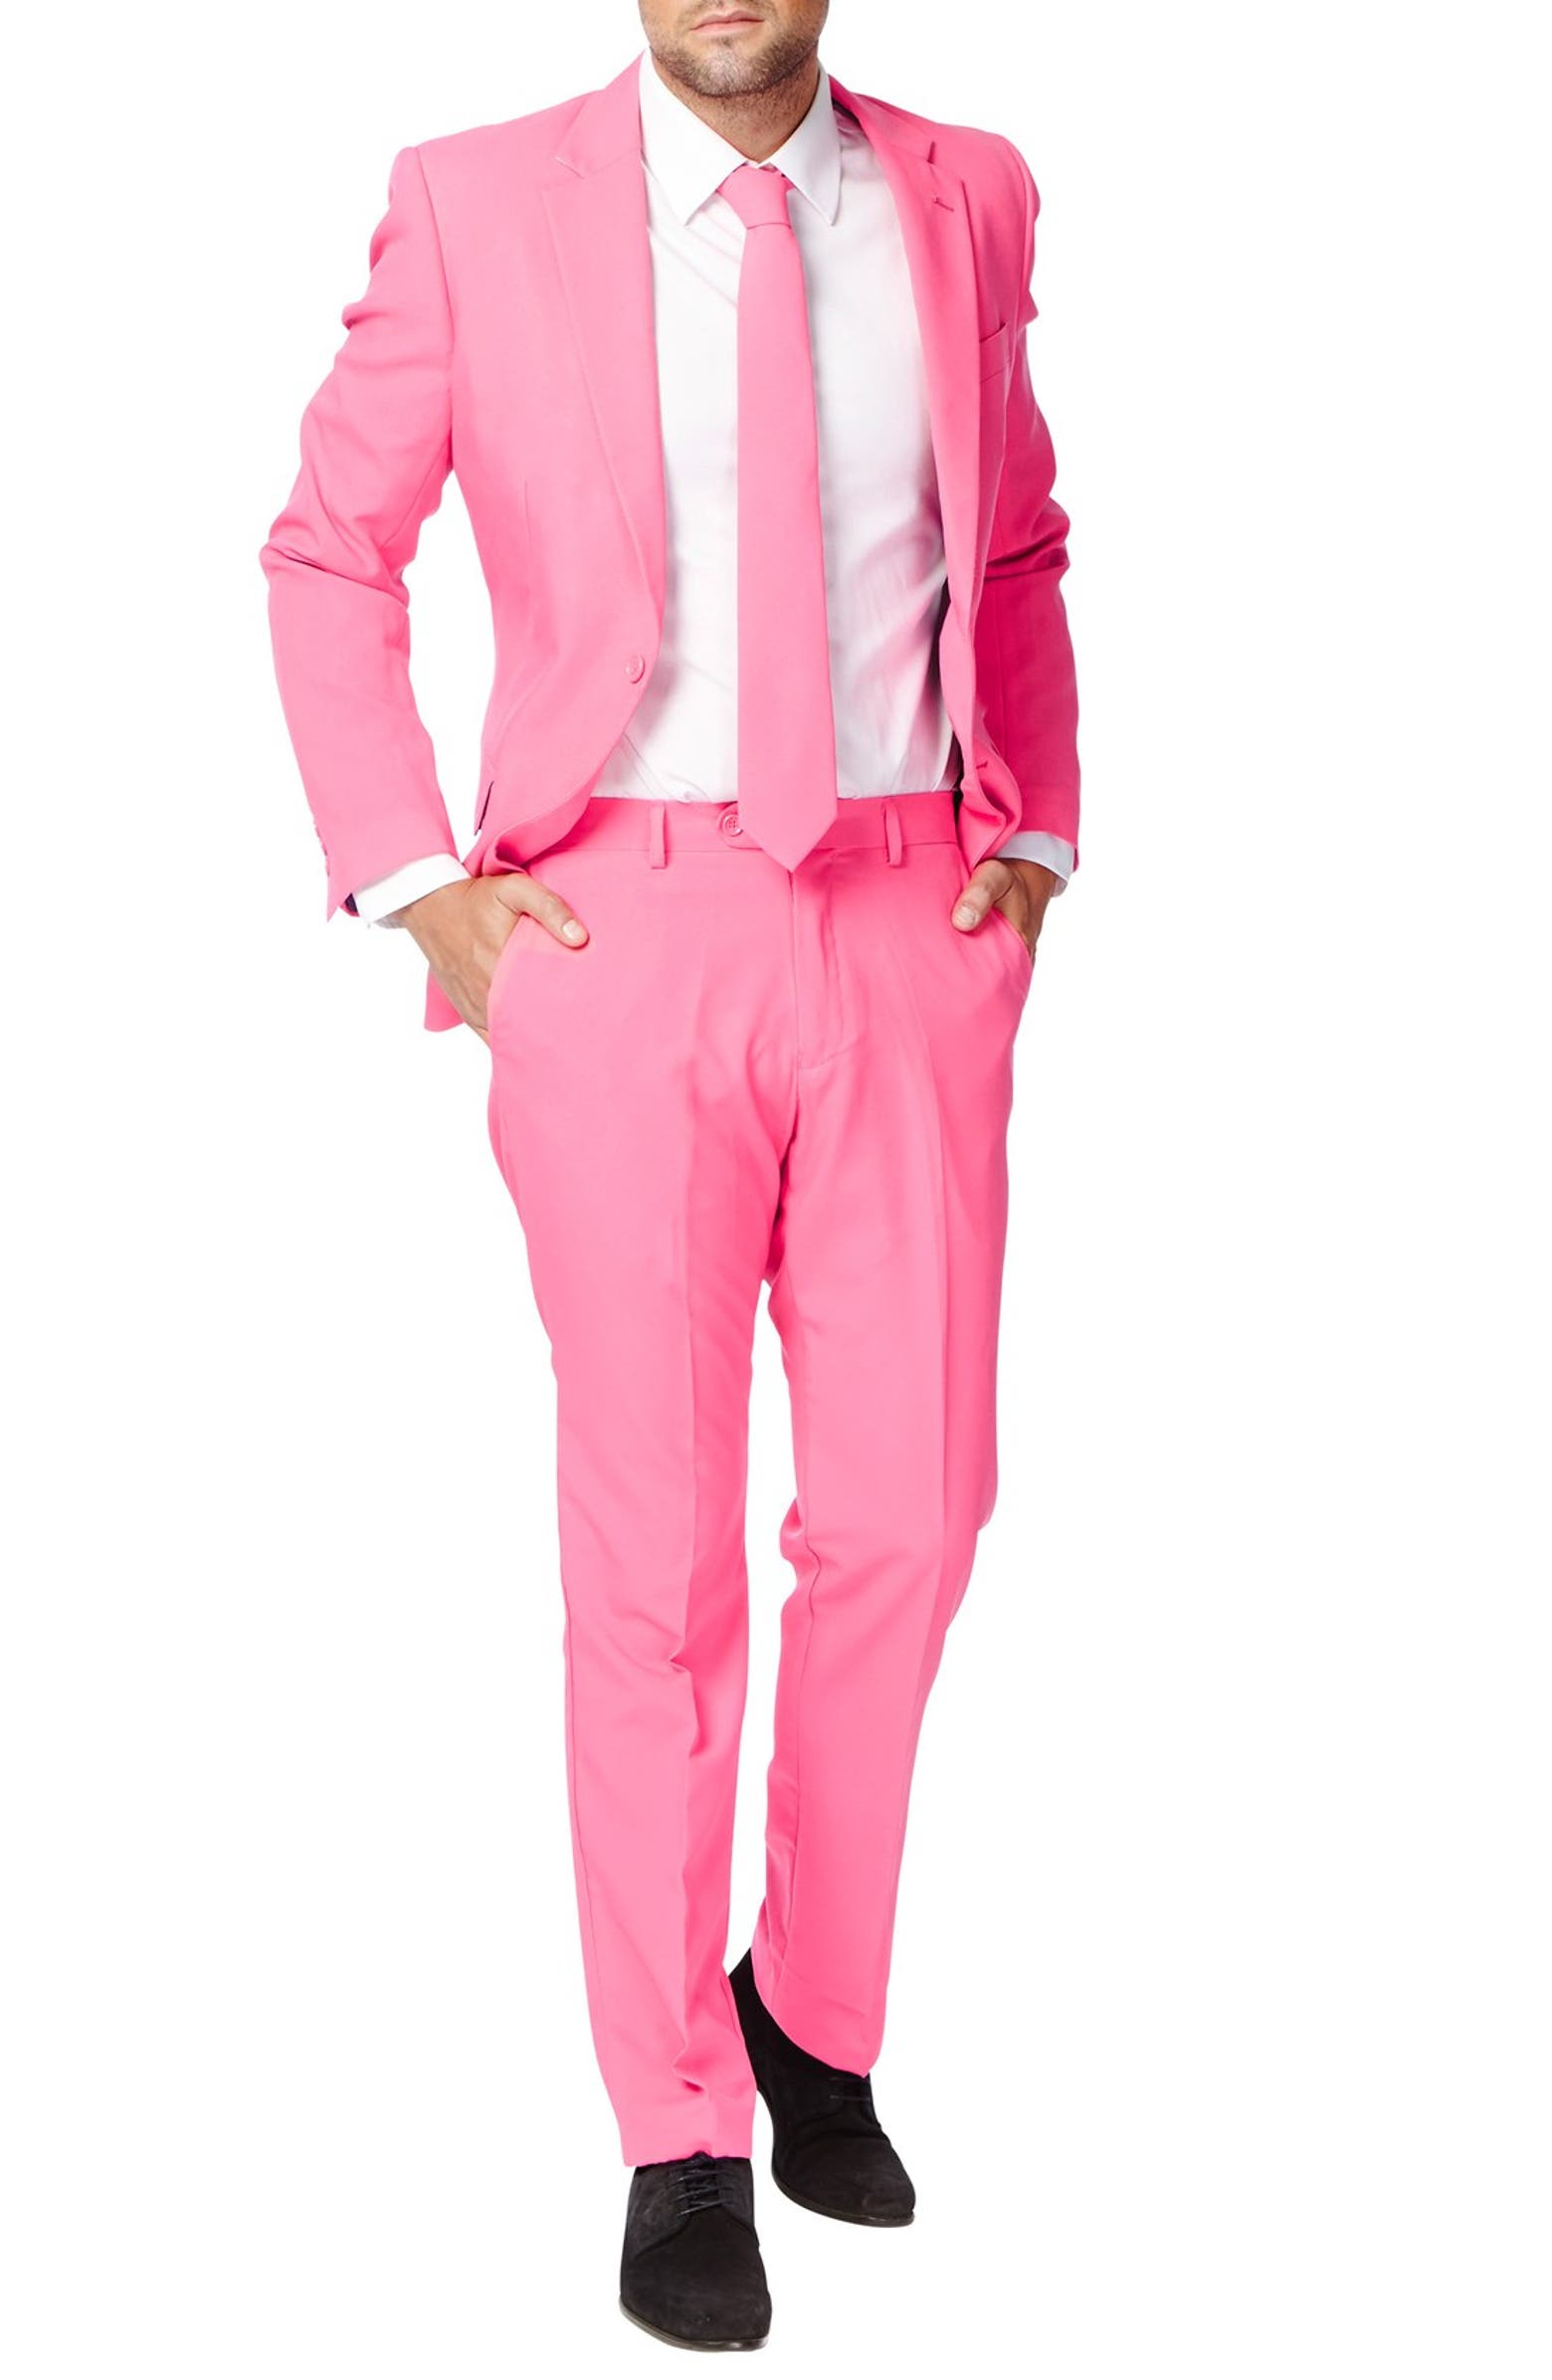 'Mr. Pink' Trim Fit Two-Piece Suit with Tie